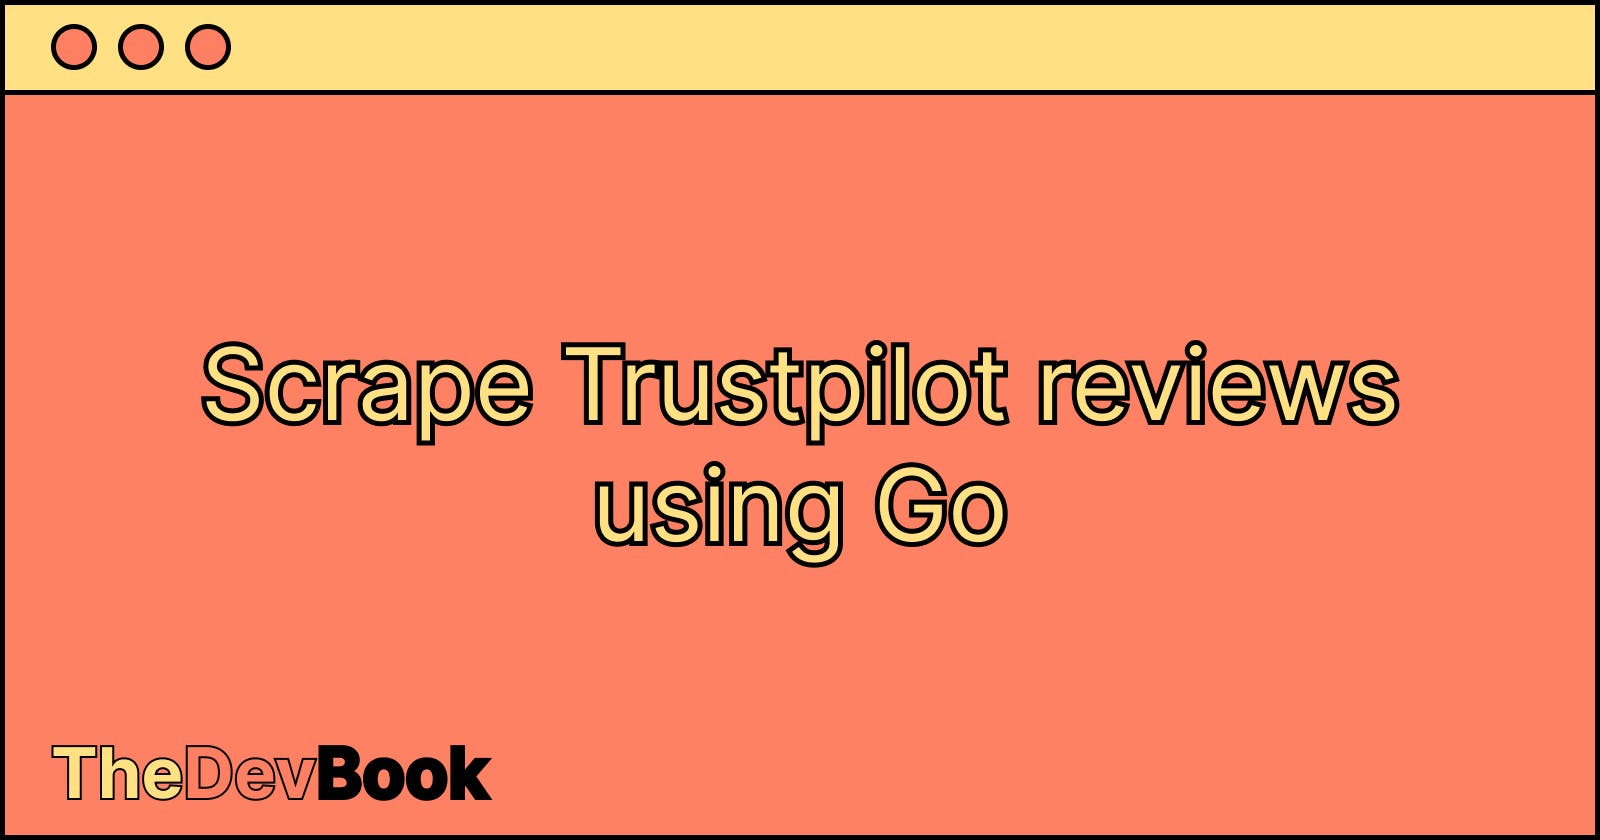 Learn how to scrape Trustpilot reviews using Go